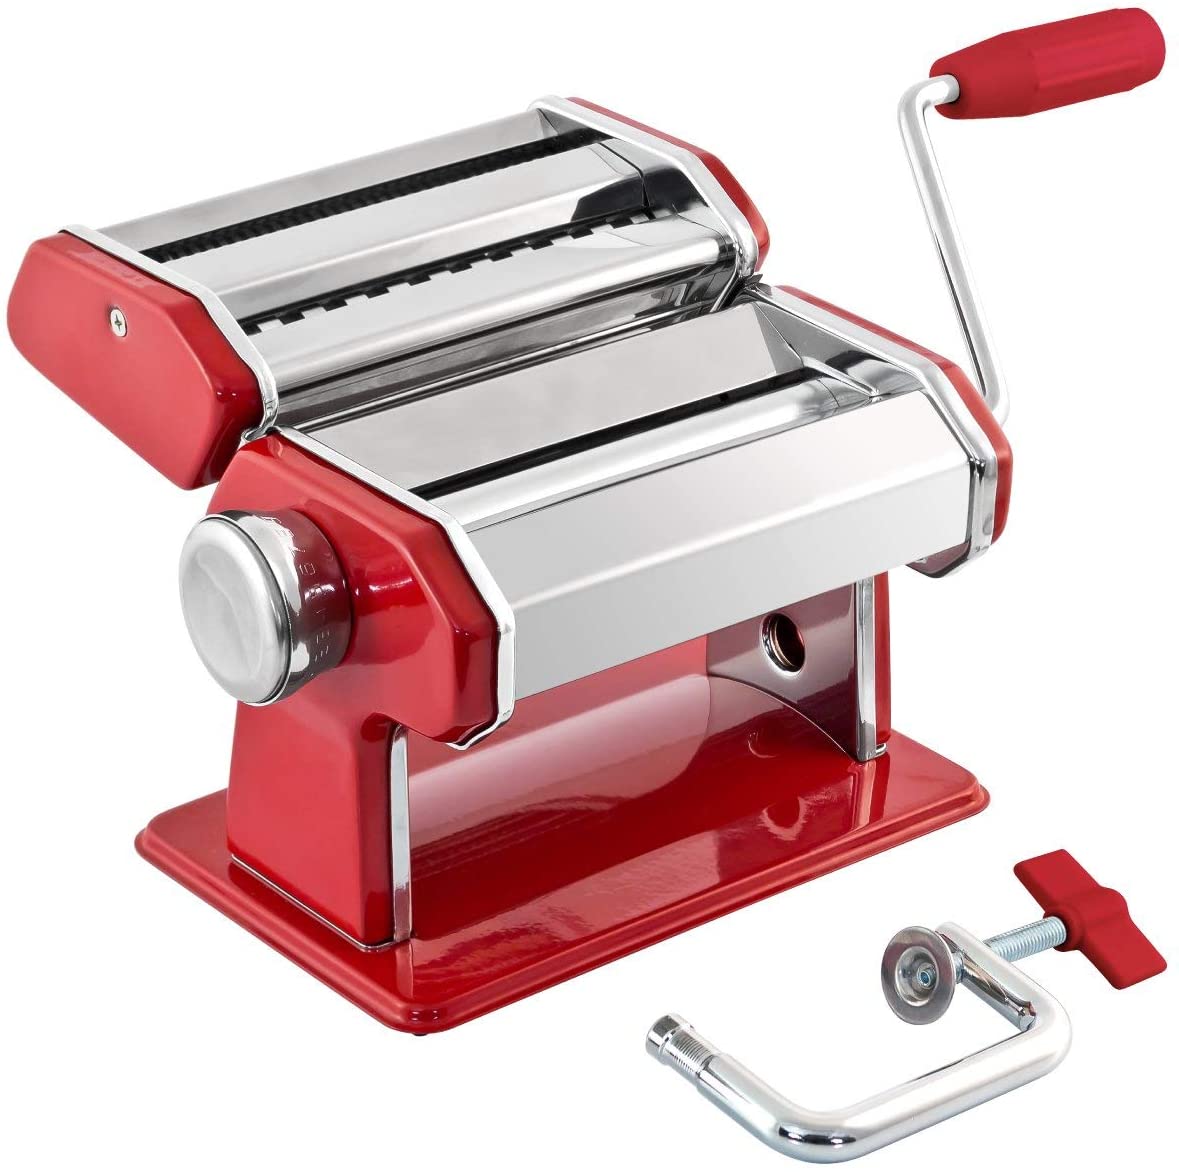 GOURMEX Compact Double Cutter Pasta Maker